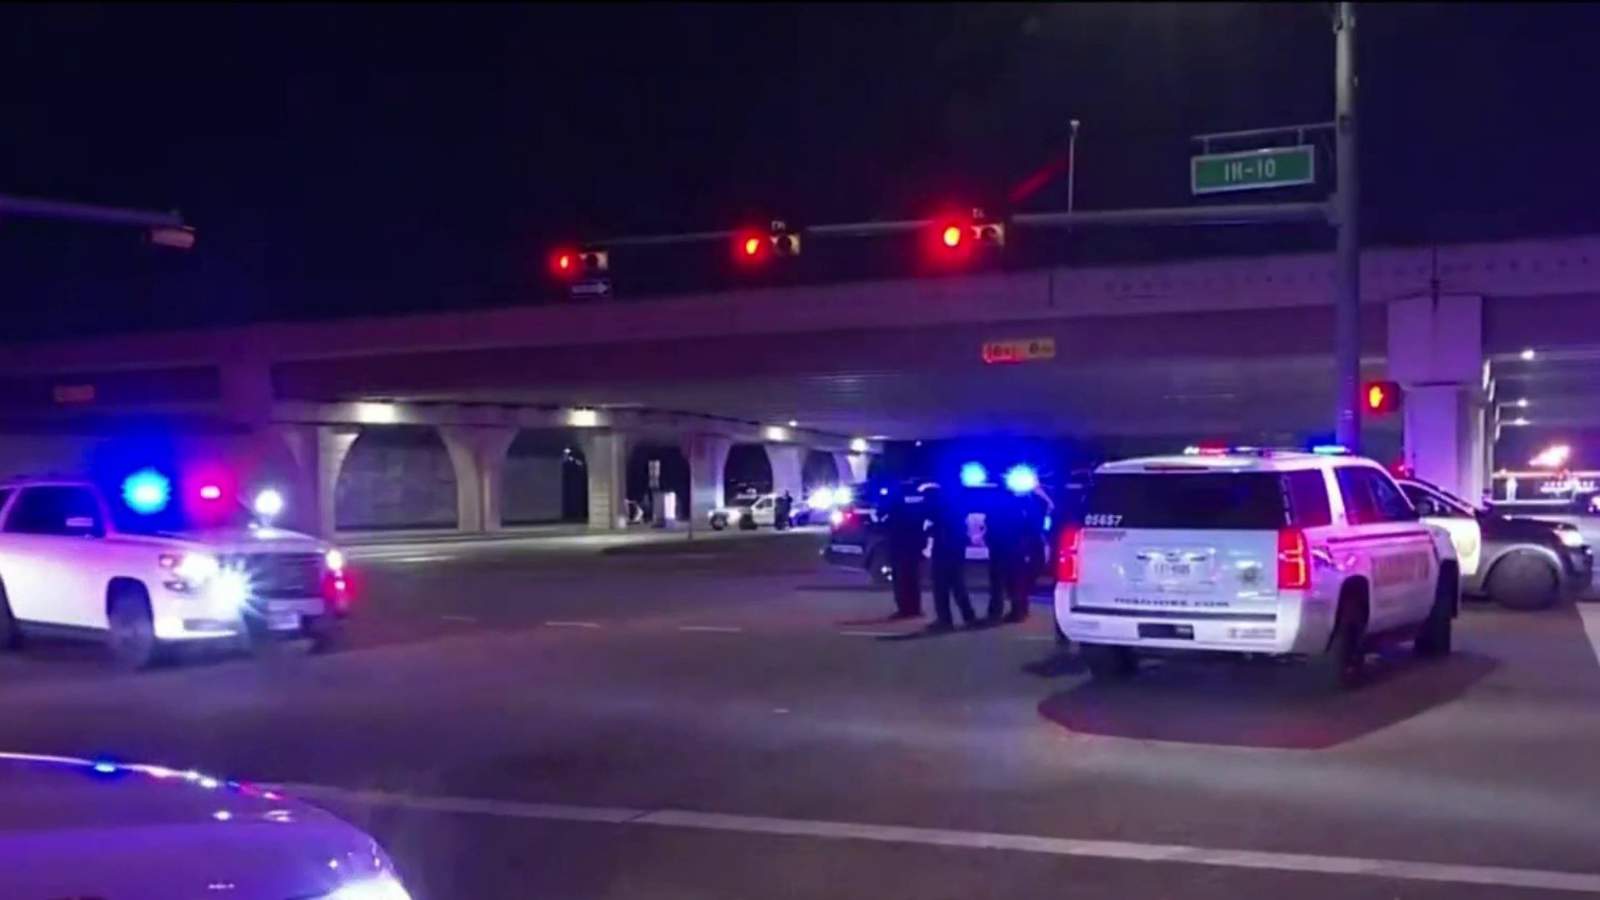 HPD: Officer-involved shooting stems from suspected road rage incident off-duty officer witnessed on Katy Freeway